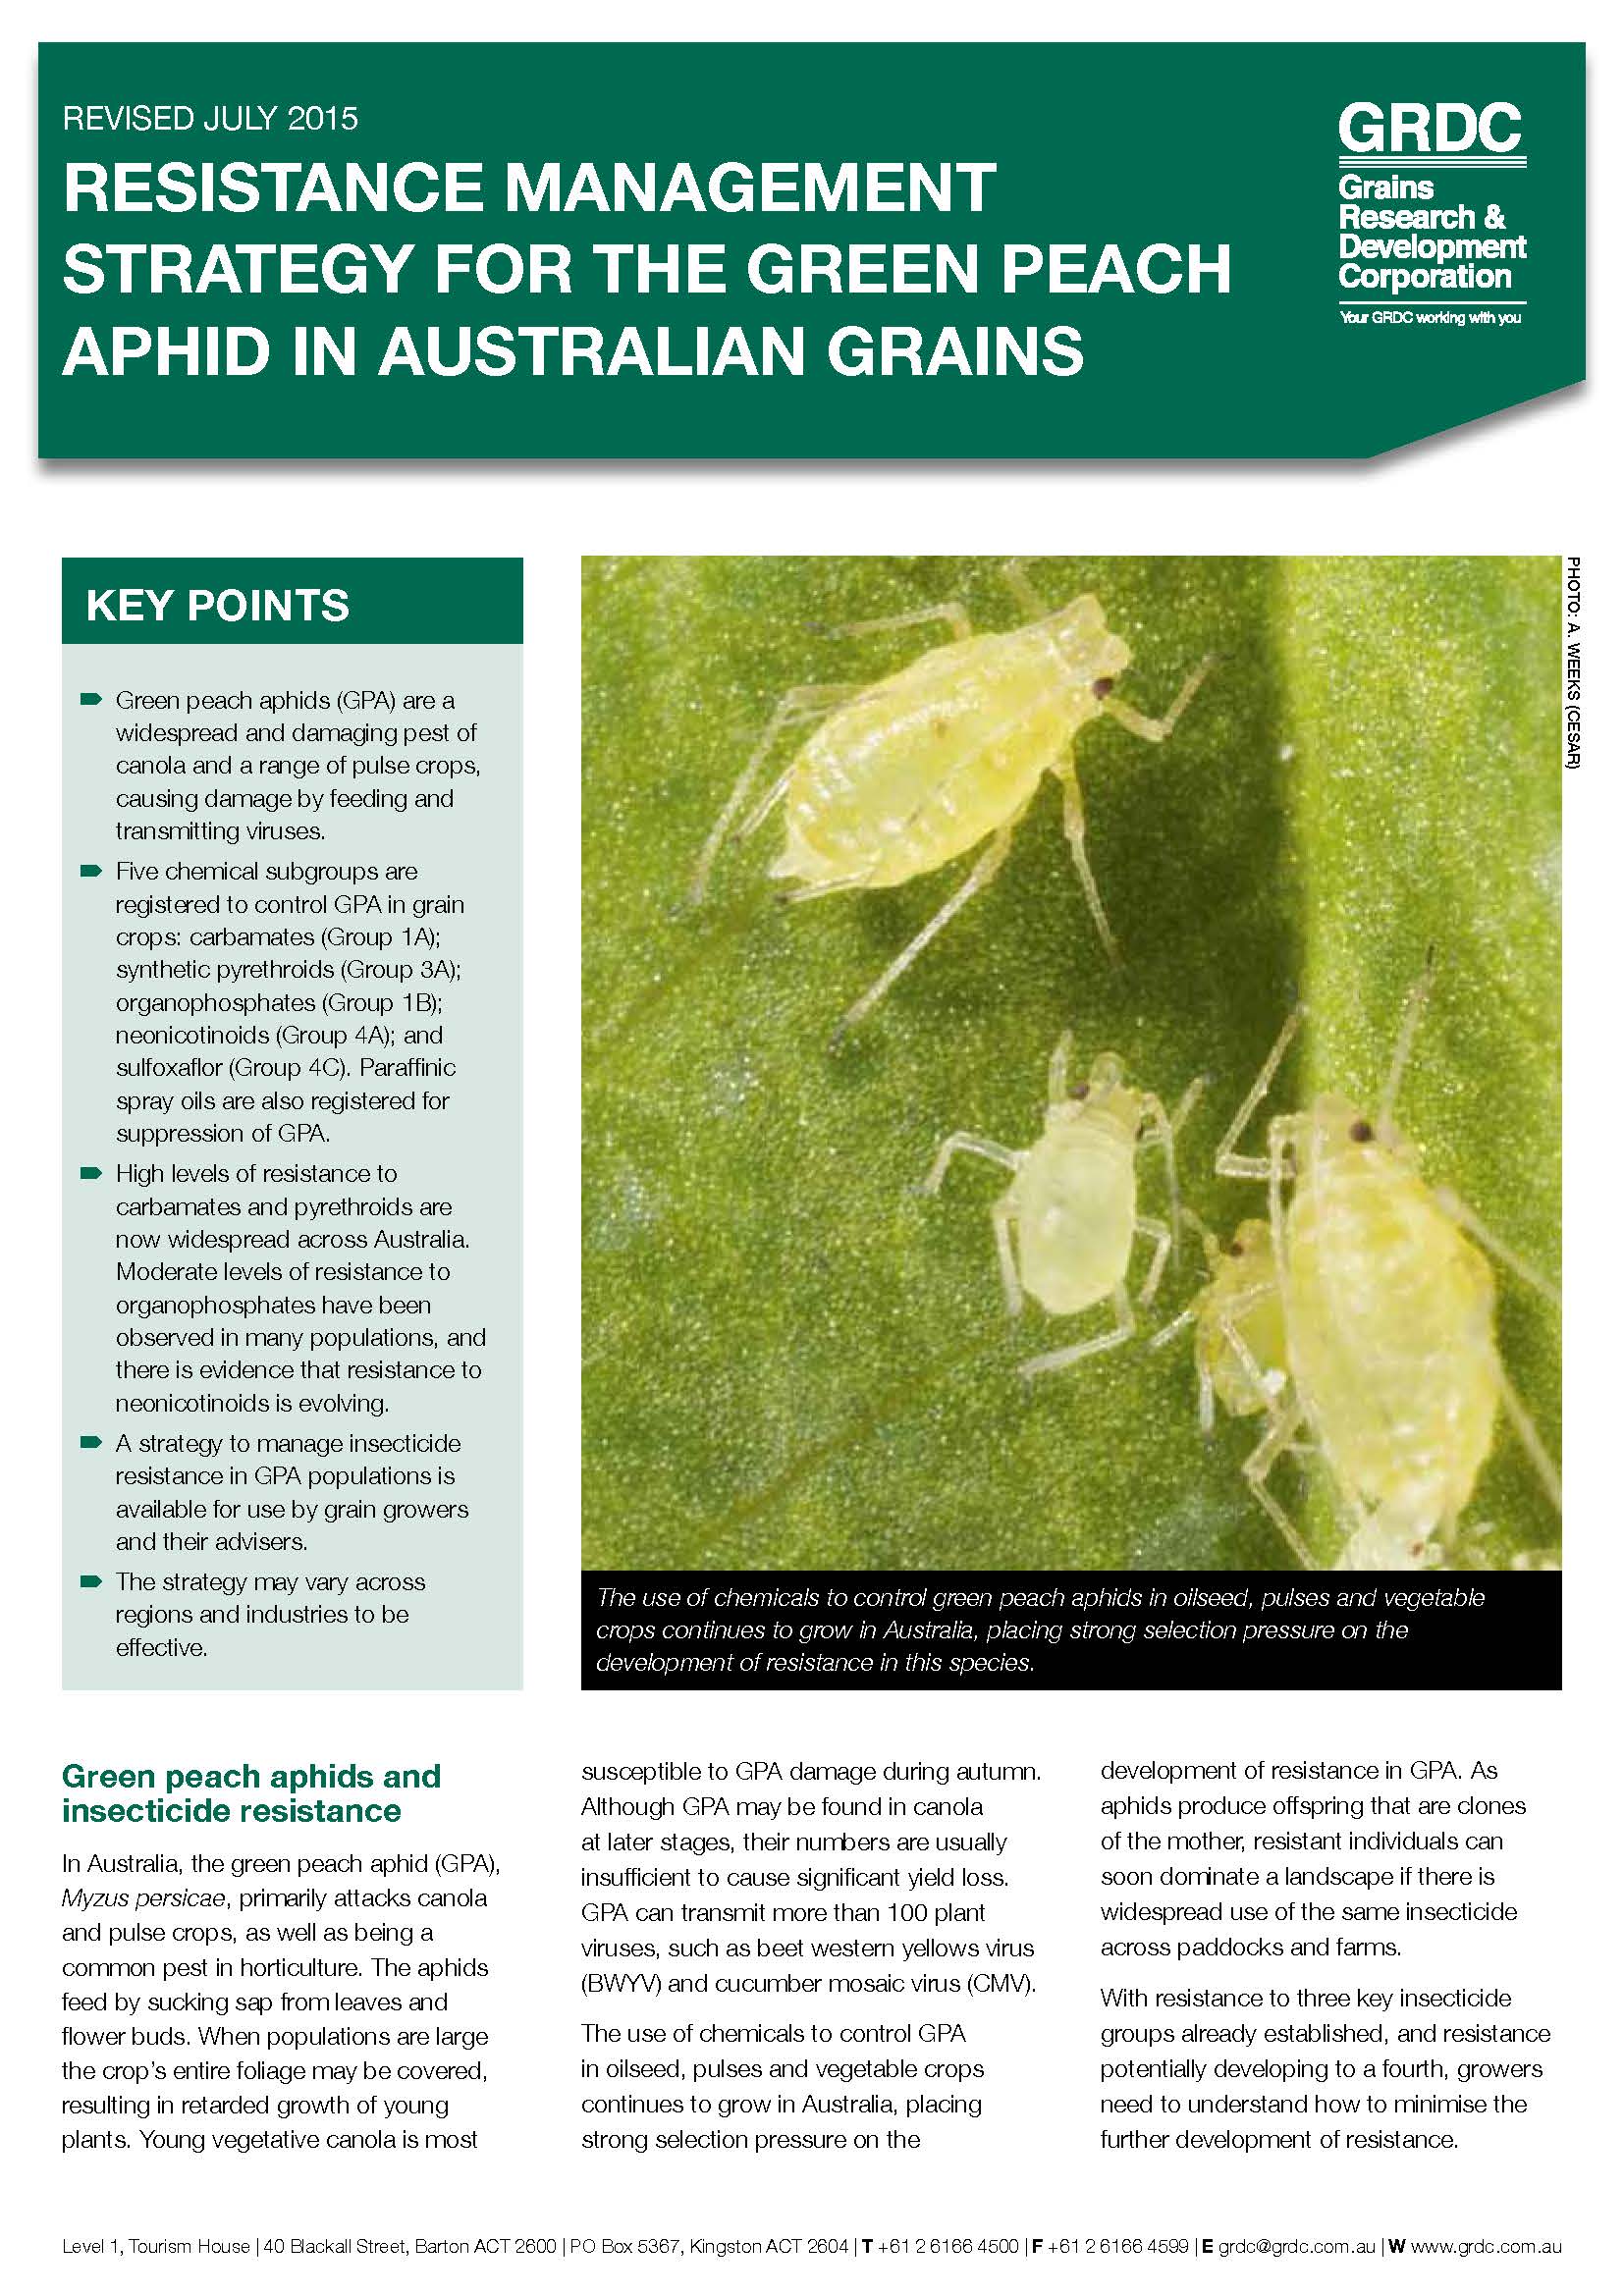 Green Peach Aphid Resistance management strategy